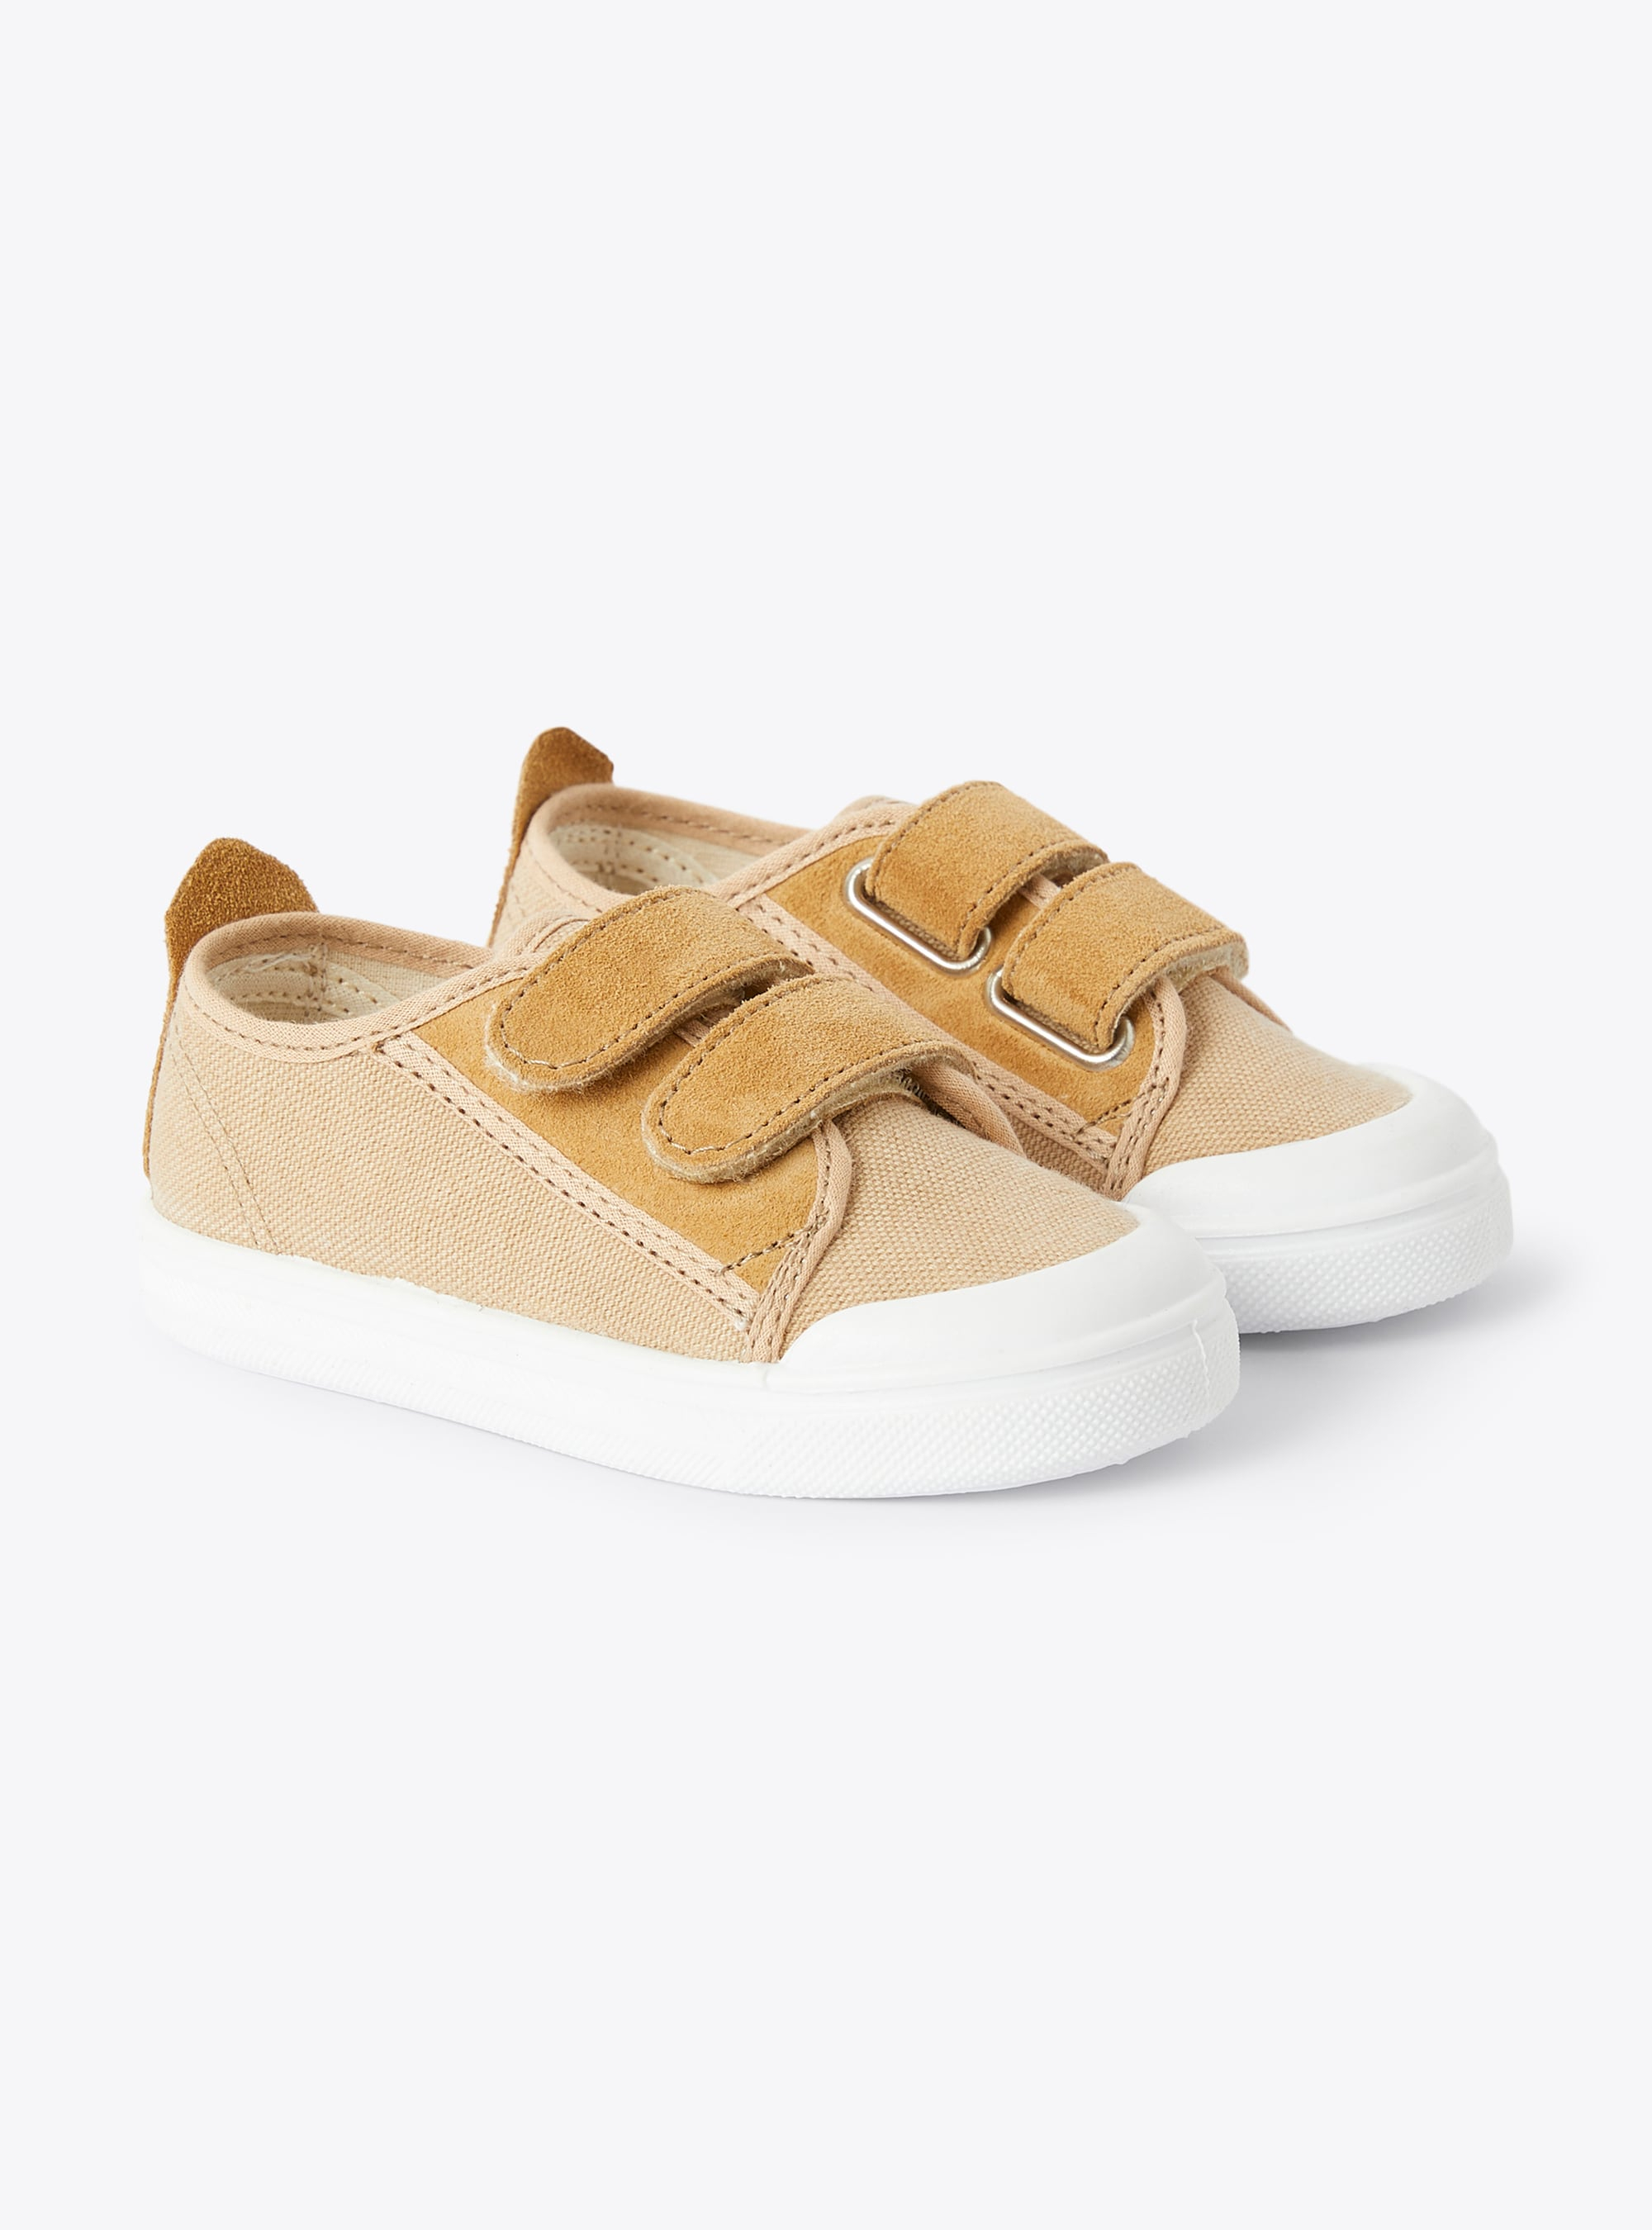 Oatmeal-hued canvas sneaker with a double riptape - Brown | Il Gufo